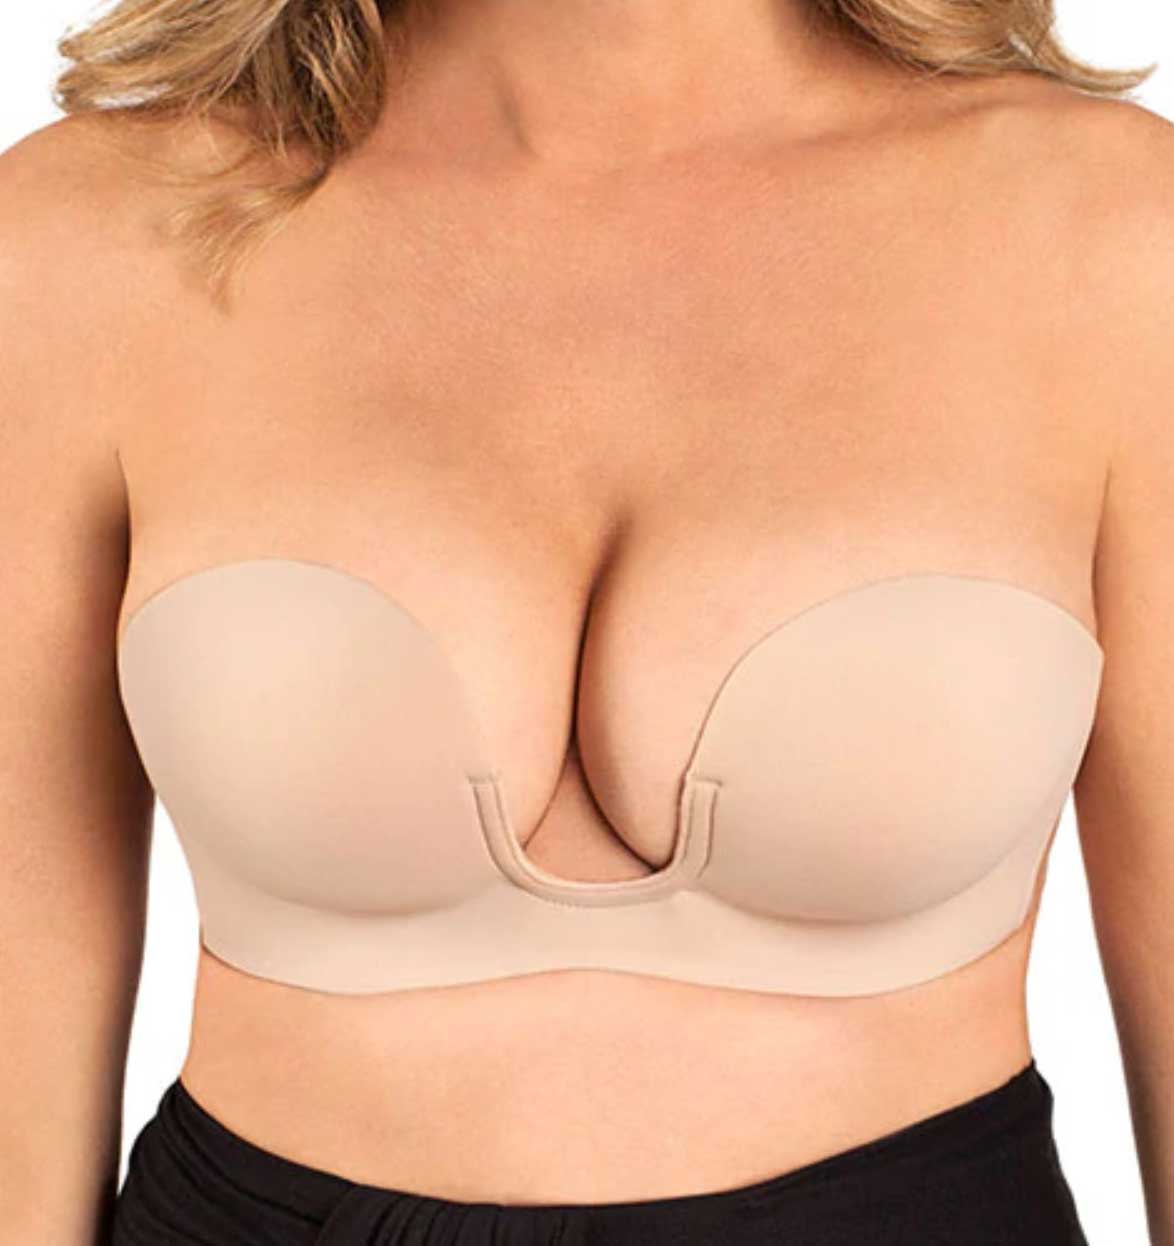 This Adhesive Bra Makes Backless and Strapless Possibilities